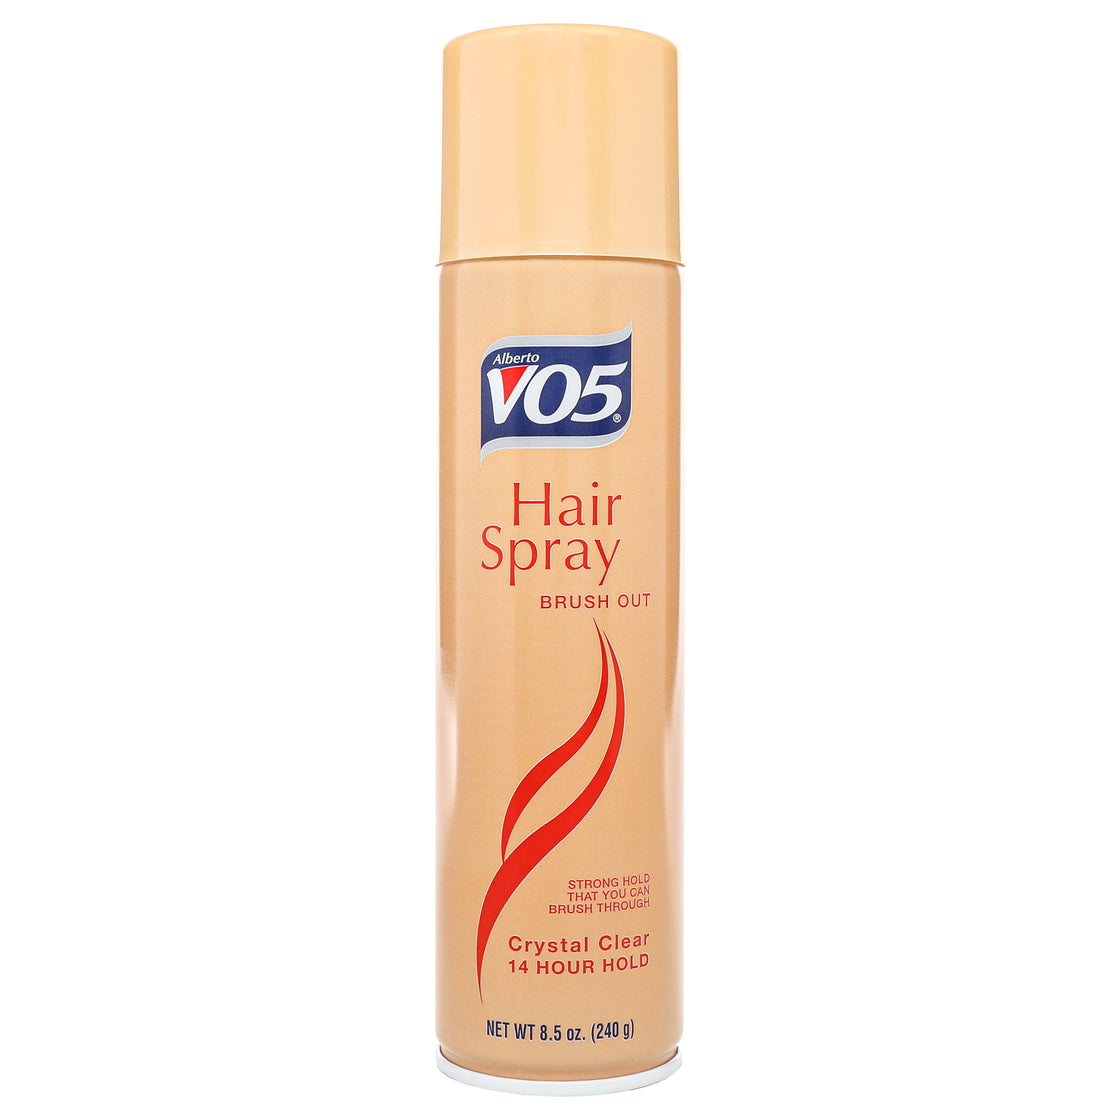 Crystal Clear Brush Out Extra Hold Hairspray by Alberto VO5 for Unisex - 8.5 oz Hair Spray